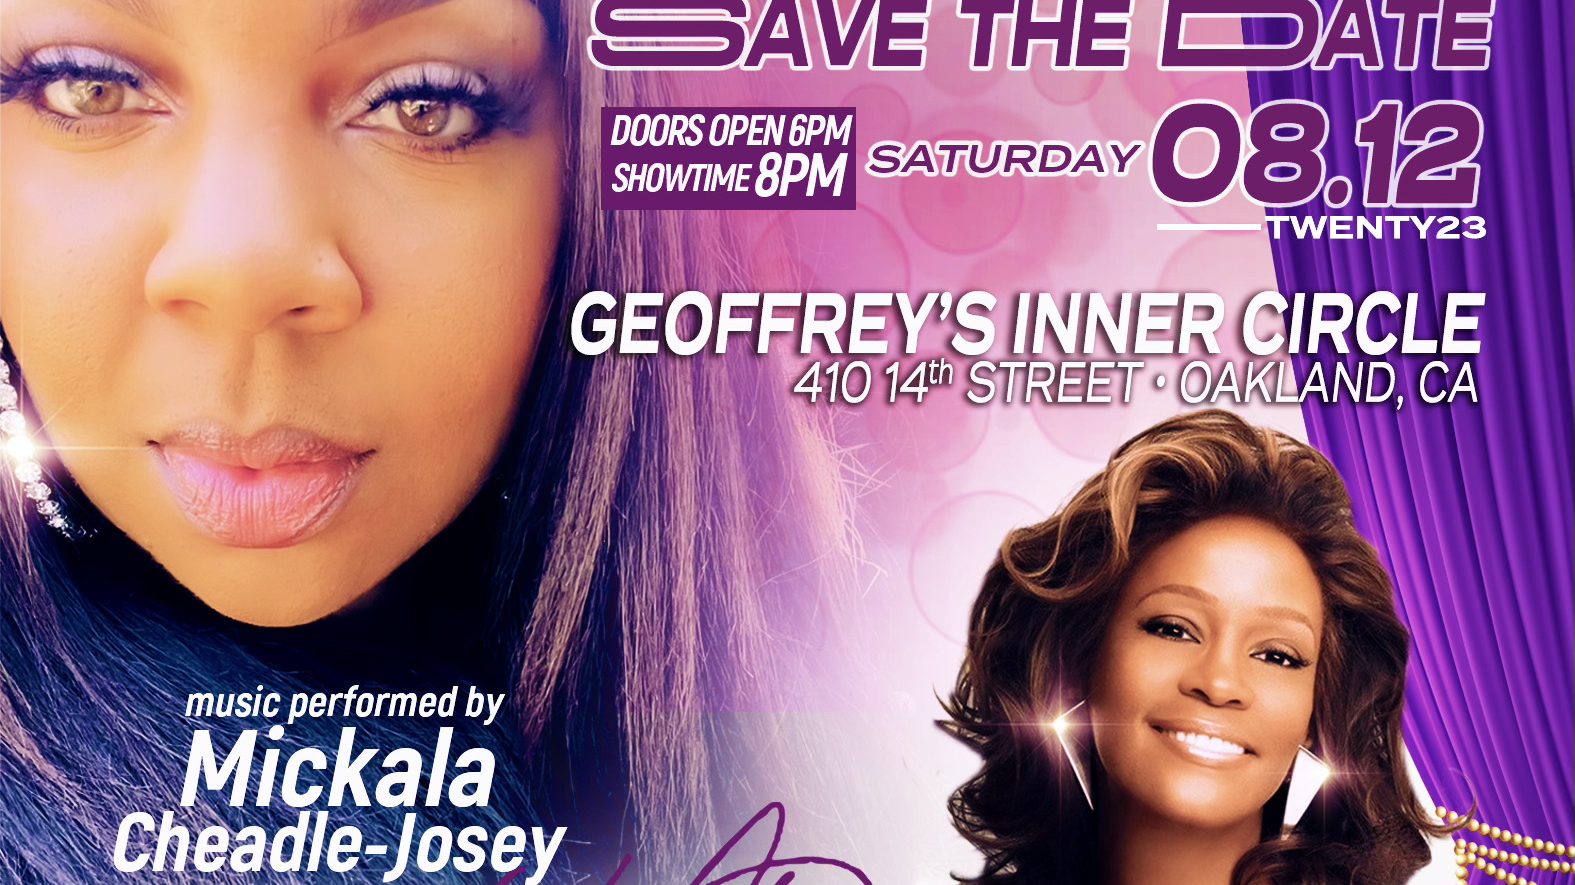 WHITNEY HOUSTON TRIBUTE BY MICKALA CHEADLE JOSEY LIVE AT GEOFFREY'S INNER CIRCLE